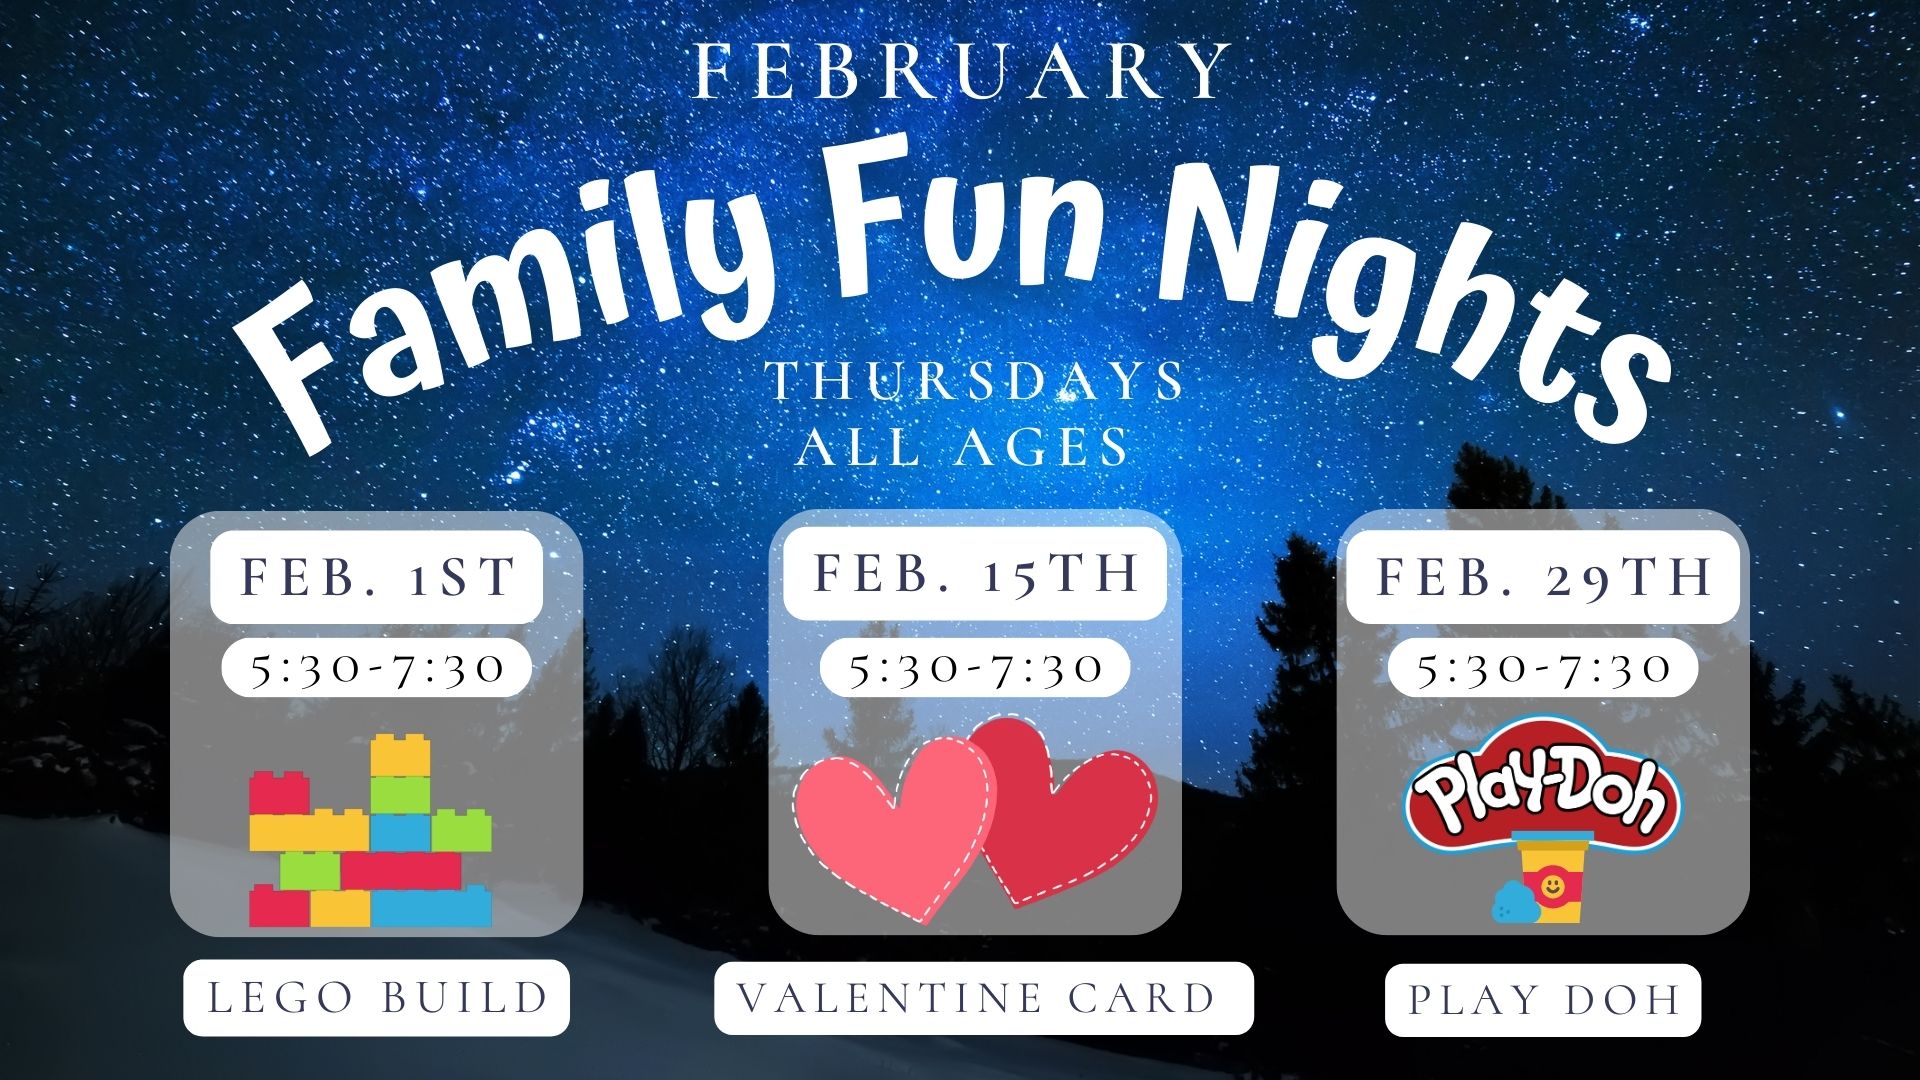 A starry night Sky with a graphic of Legos, Hearts, and Play Doh.  Text Reads: February Family Fun Nights, Thursdays all ages.  February 1  5:30 to 7:30 Lego Play,  February 15 5:30-7:30 Valentine Cards,  and February 29 5:30-7:30 Play Doh.